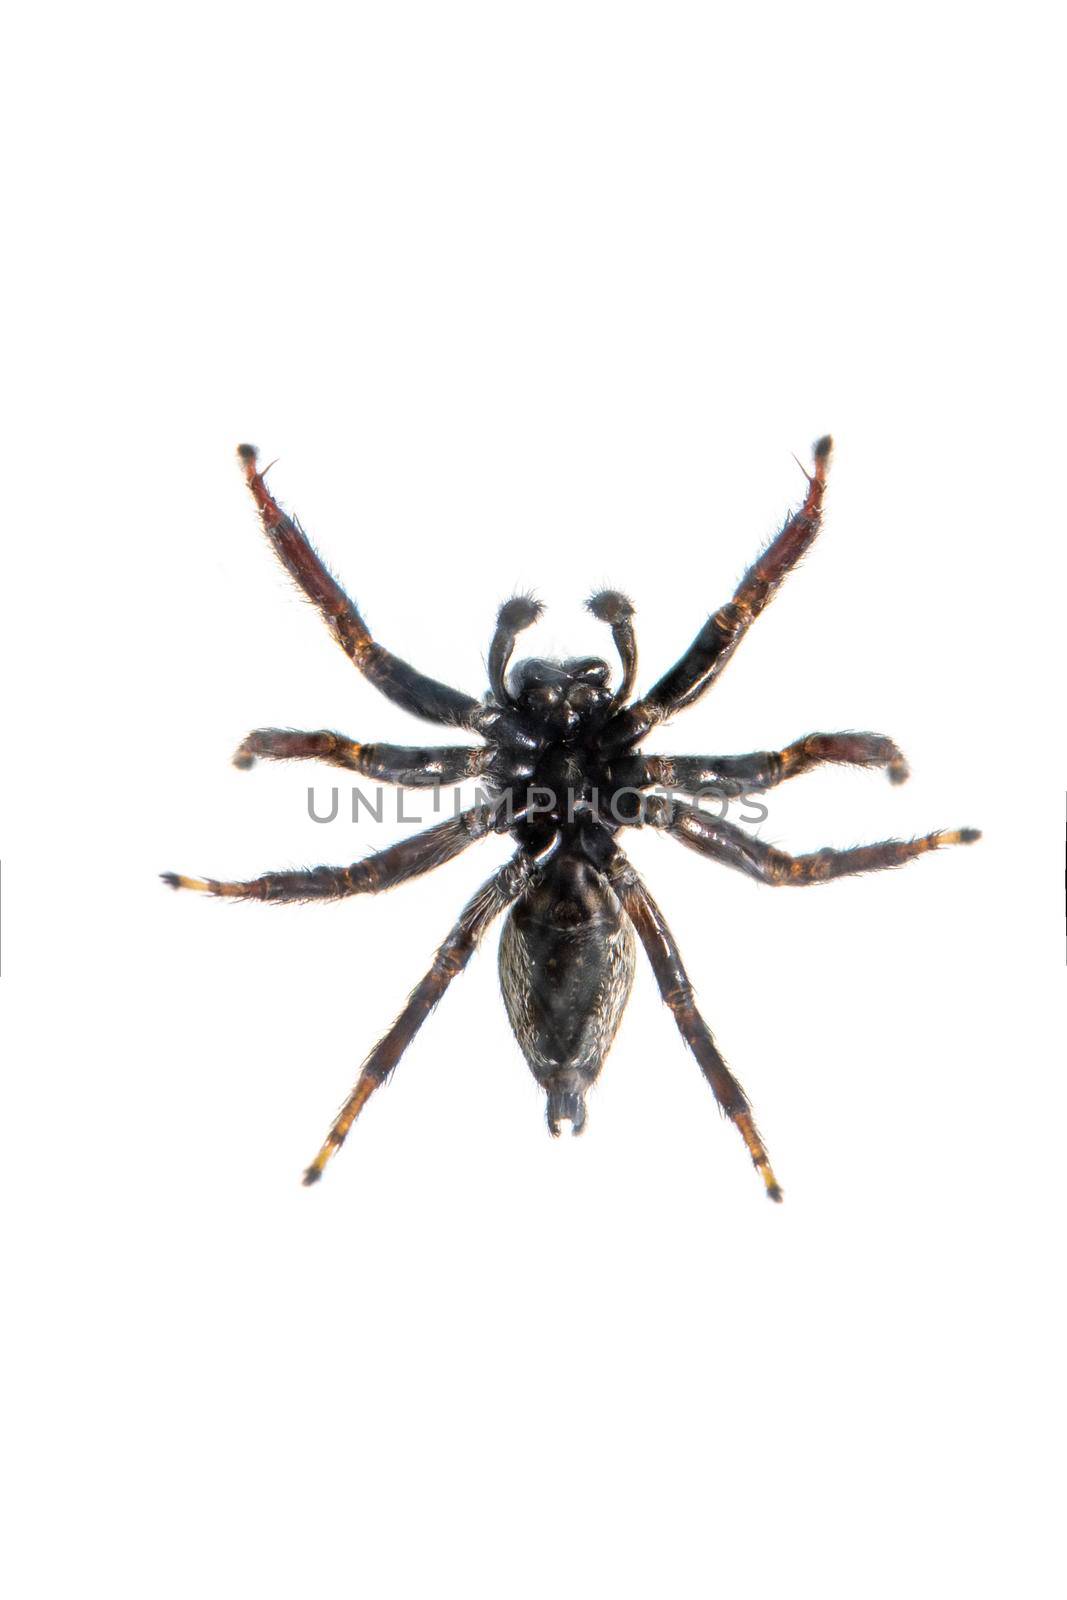 Image of biting jumping spider (Opisthoncus mordax) on white background. View from the bottom. Insect. Animal by yod67